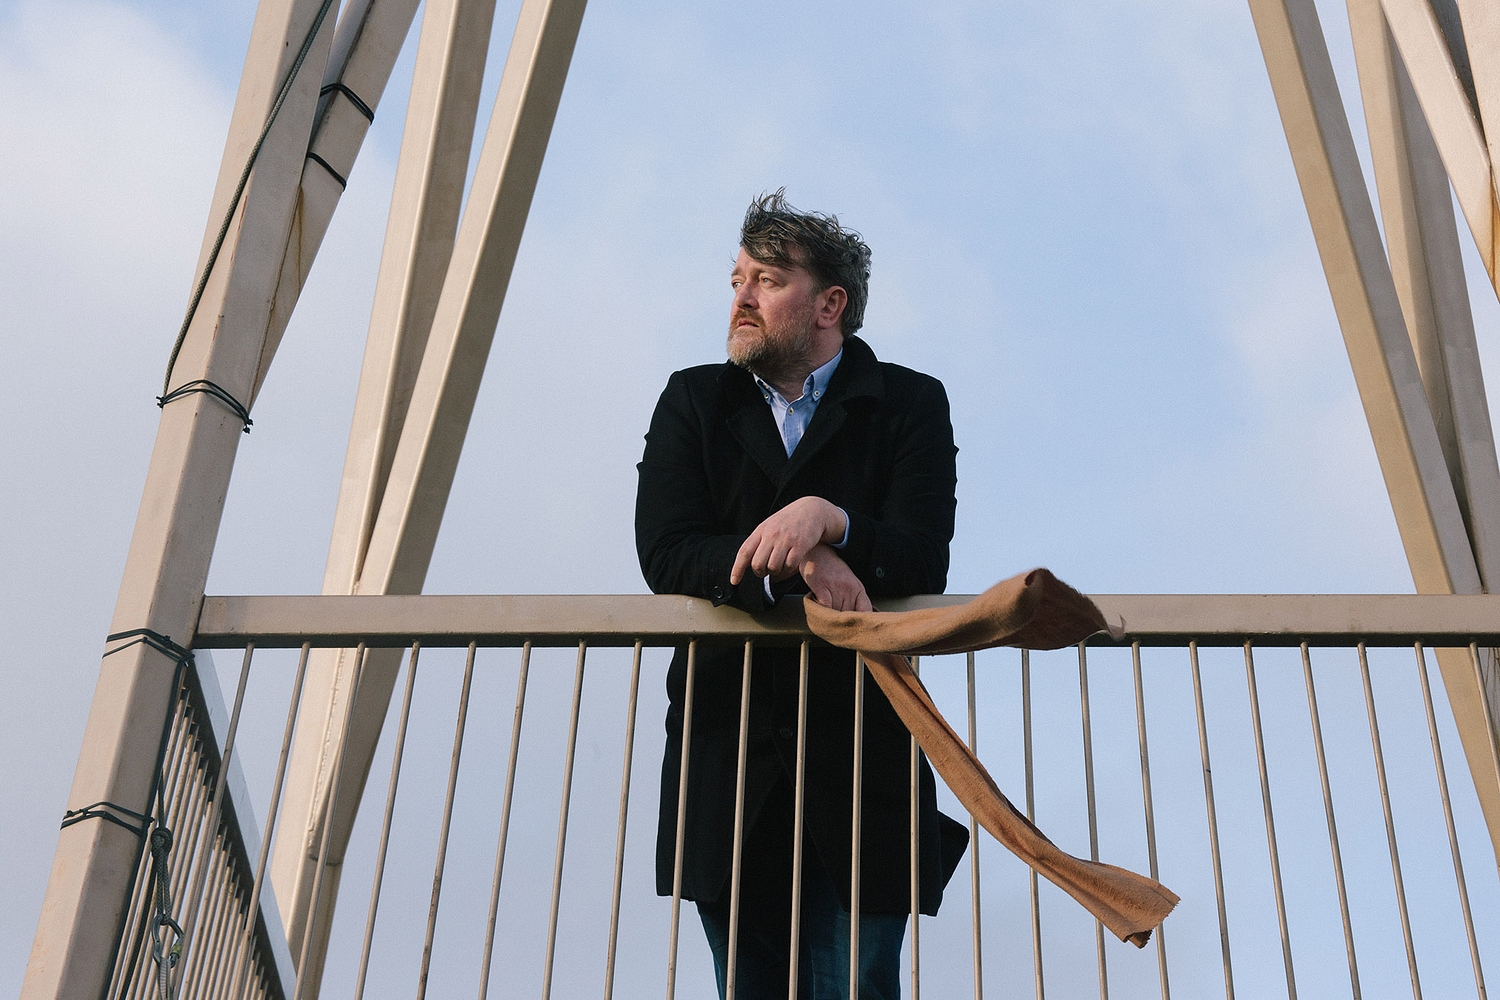 Guy Garvey: “First and foremost, I wanted the line-up to be good”